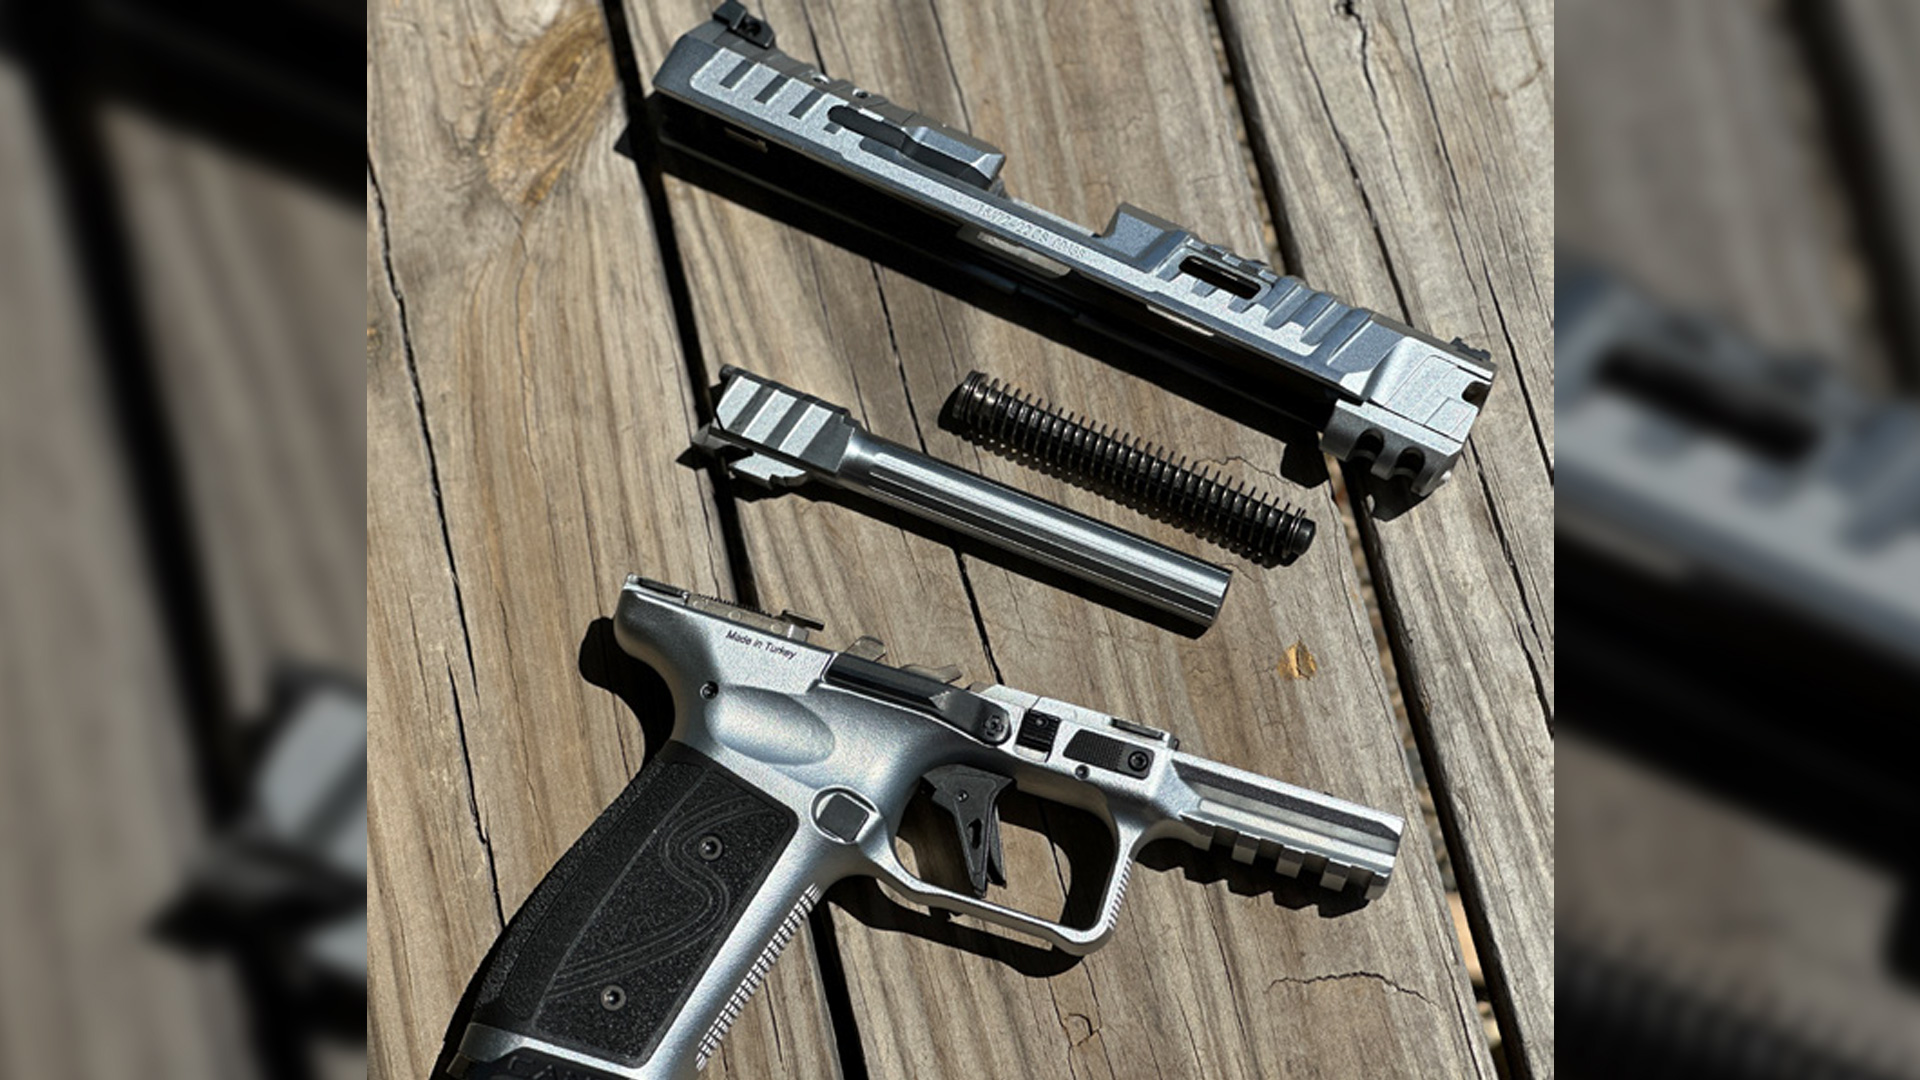 Disassembled Canik SFx Rival-S pistol